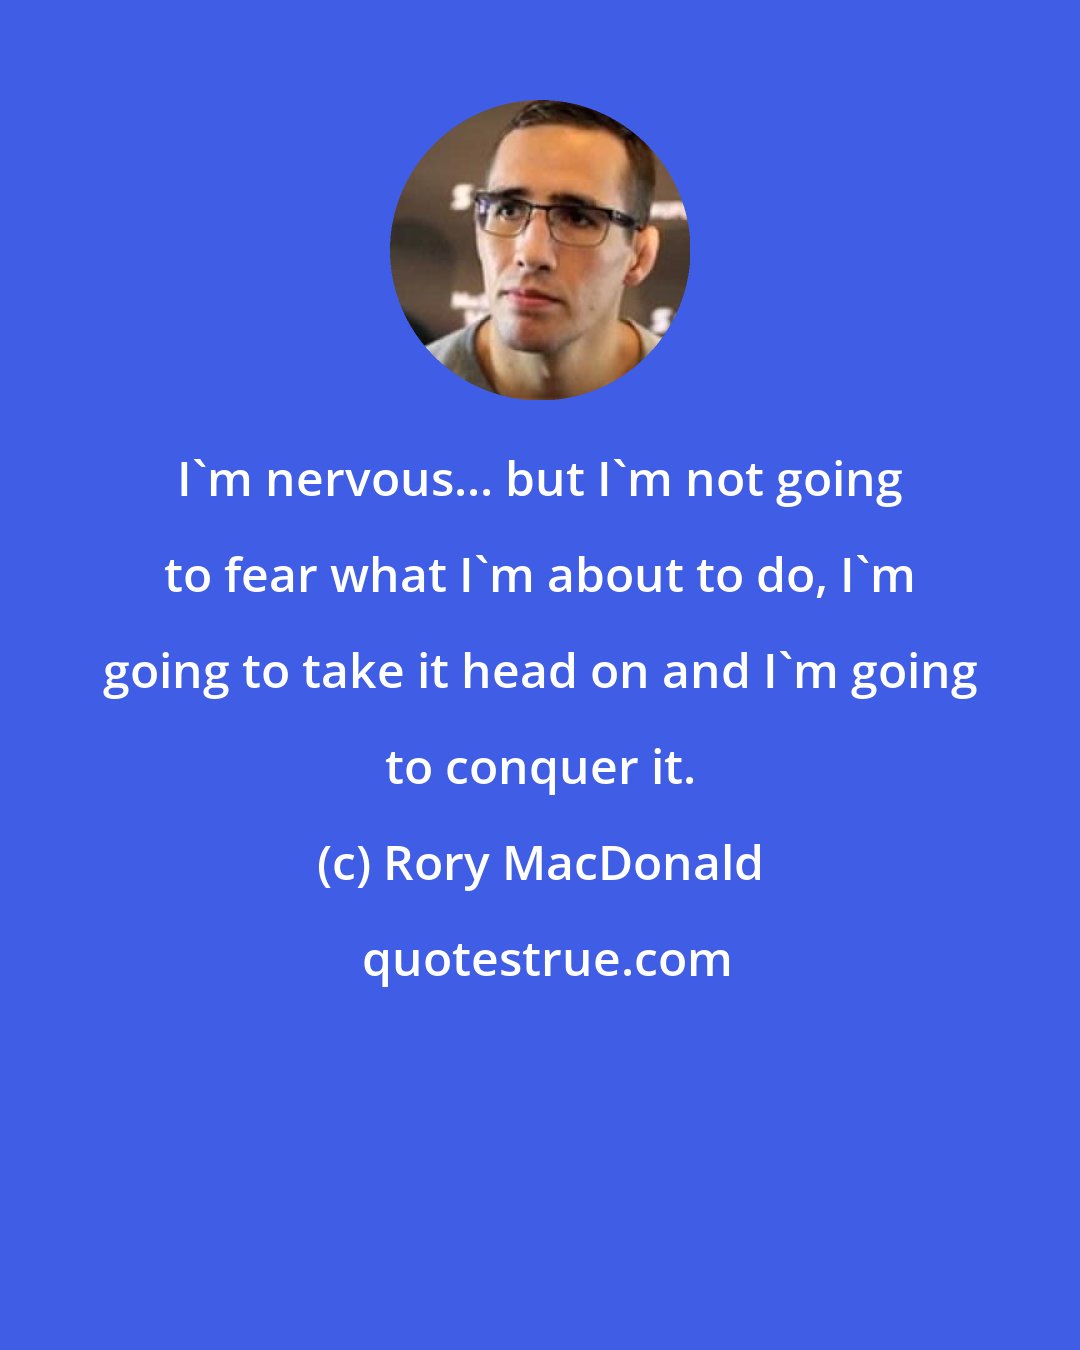 Rory MacDonald: I'm nervous... but I'm not going to fear what I'm about to do, I'm going to take it head on and I'm going to conquer it.